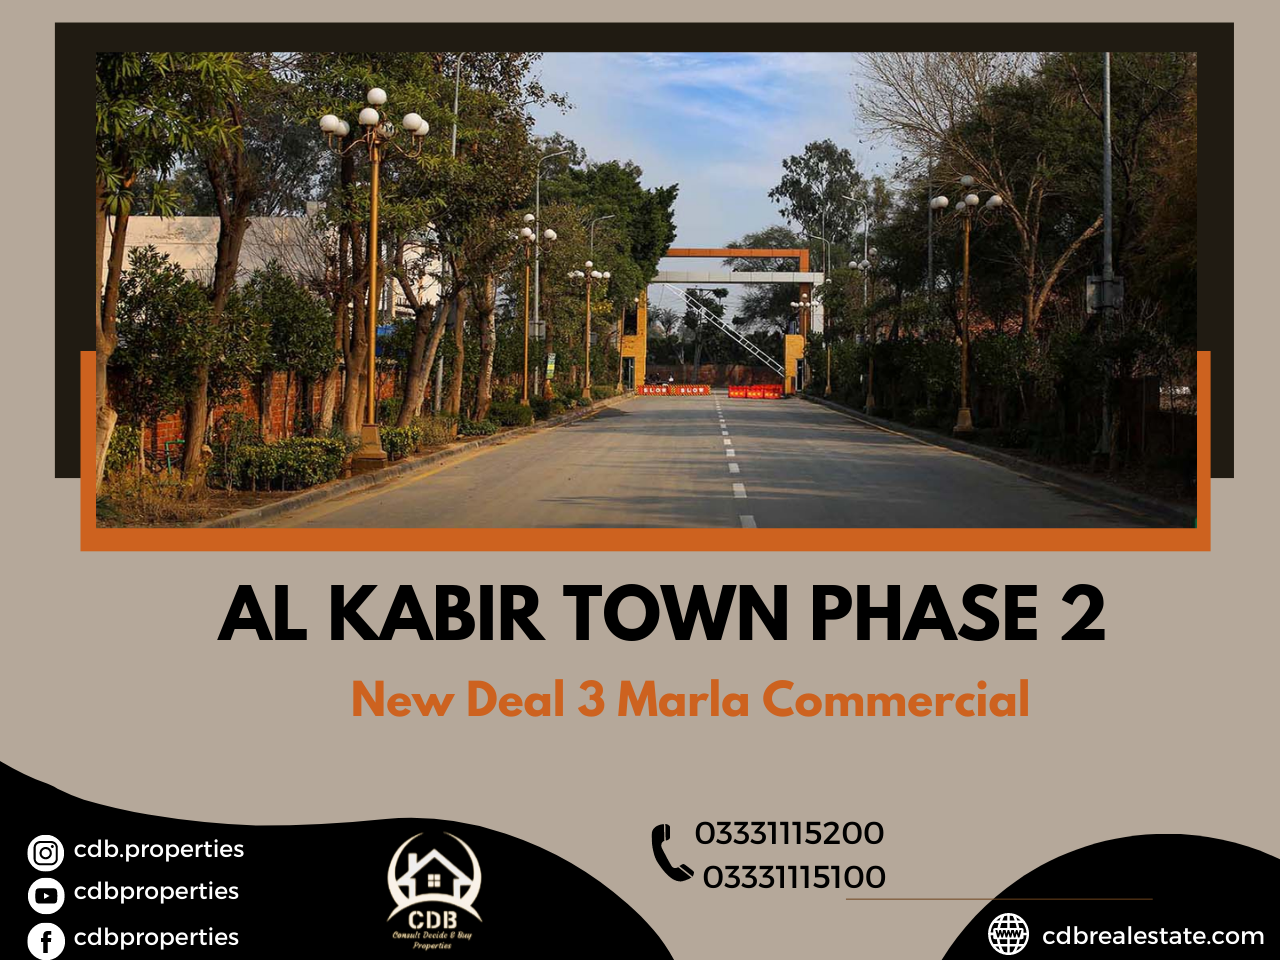 Al Kabir Town Phase 2 New 3 Marla Commercial Deal Launched